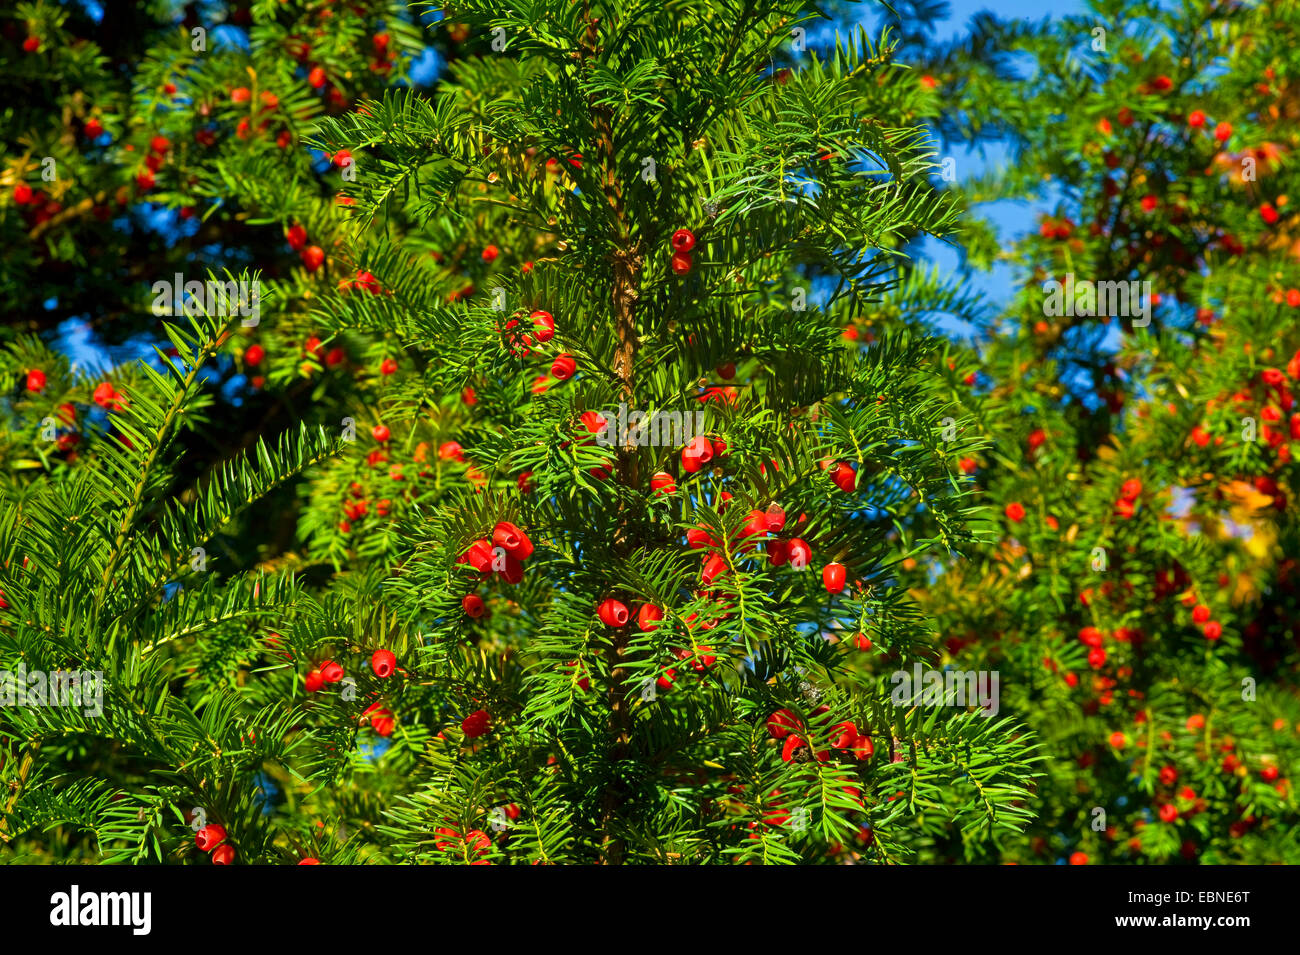 Common yew, English yew, European yew (Taxus baccata), branches with seeds, Germany Stock Photo